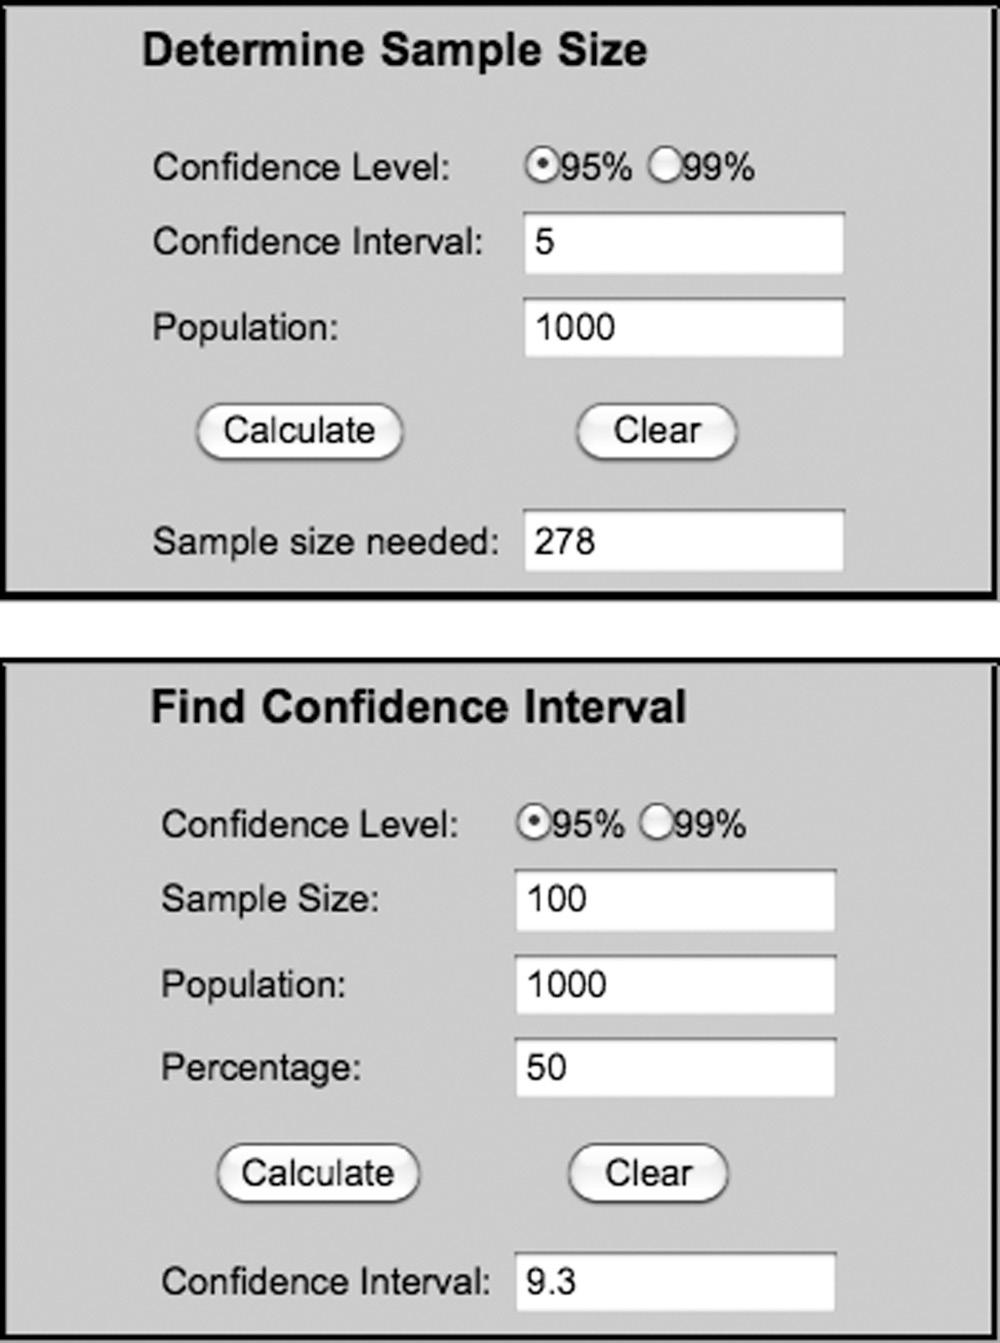 Technique Tip Calculating Sample Size The various sample size calculators available on the internet (see the Companion Website) make this issue relatively straightforward. Using one of these www.